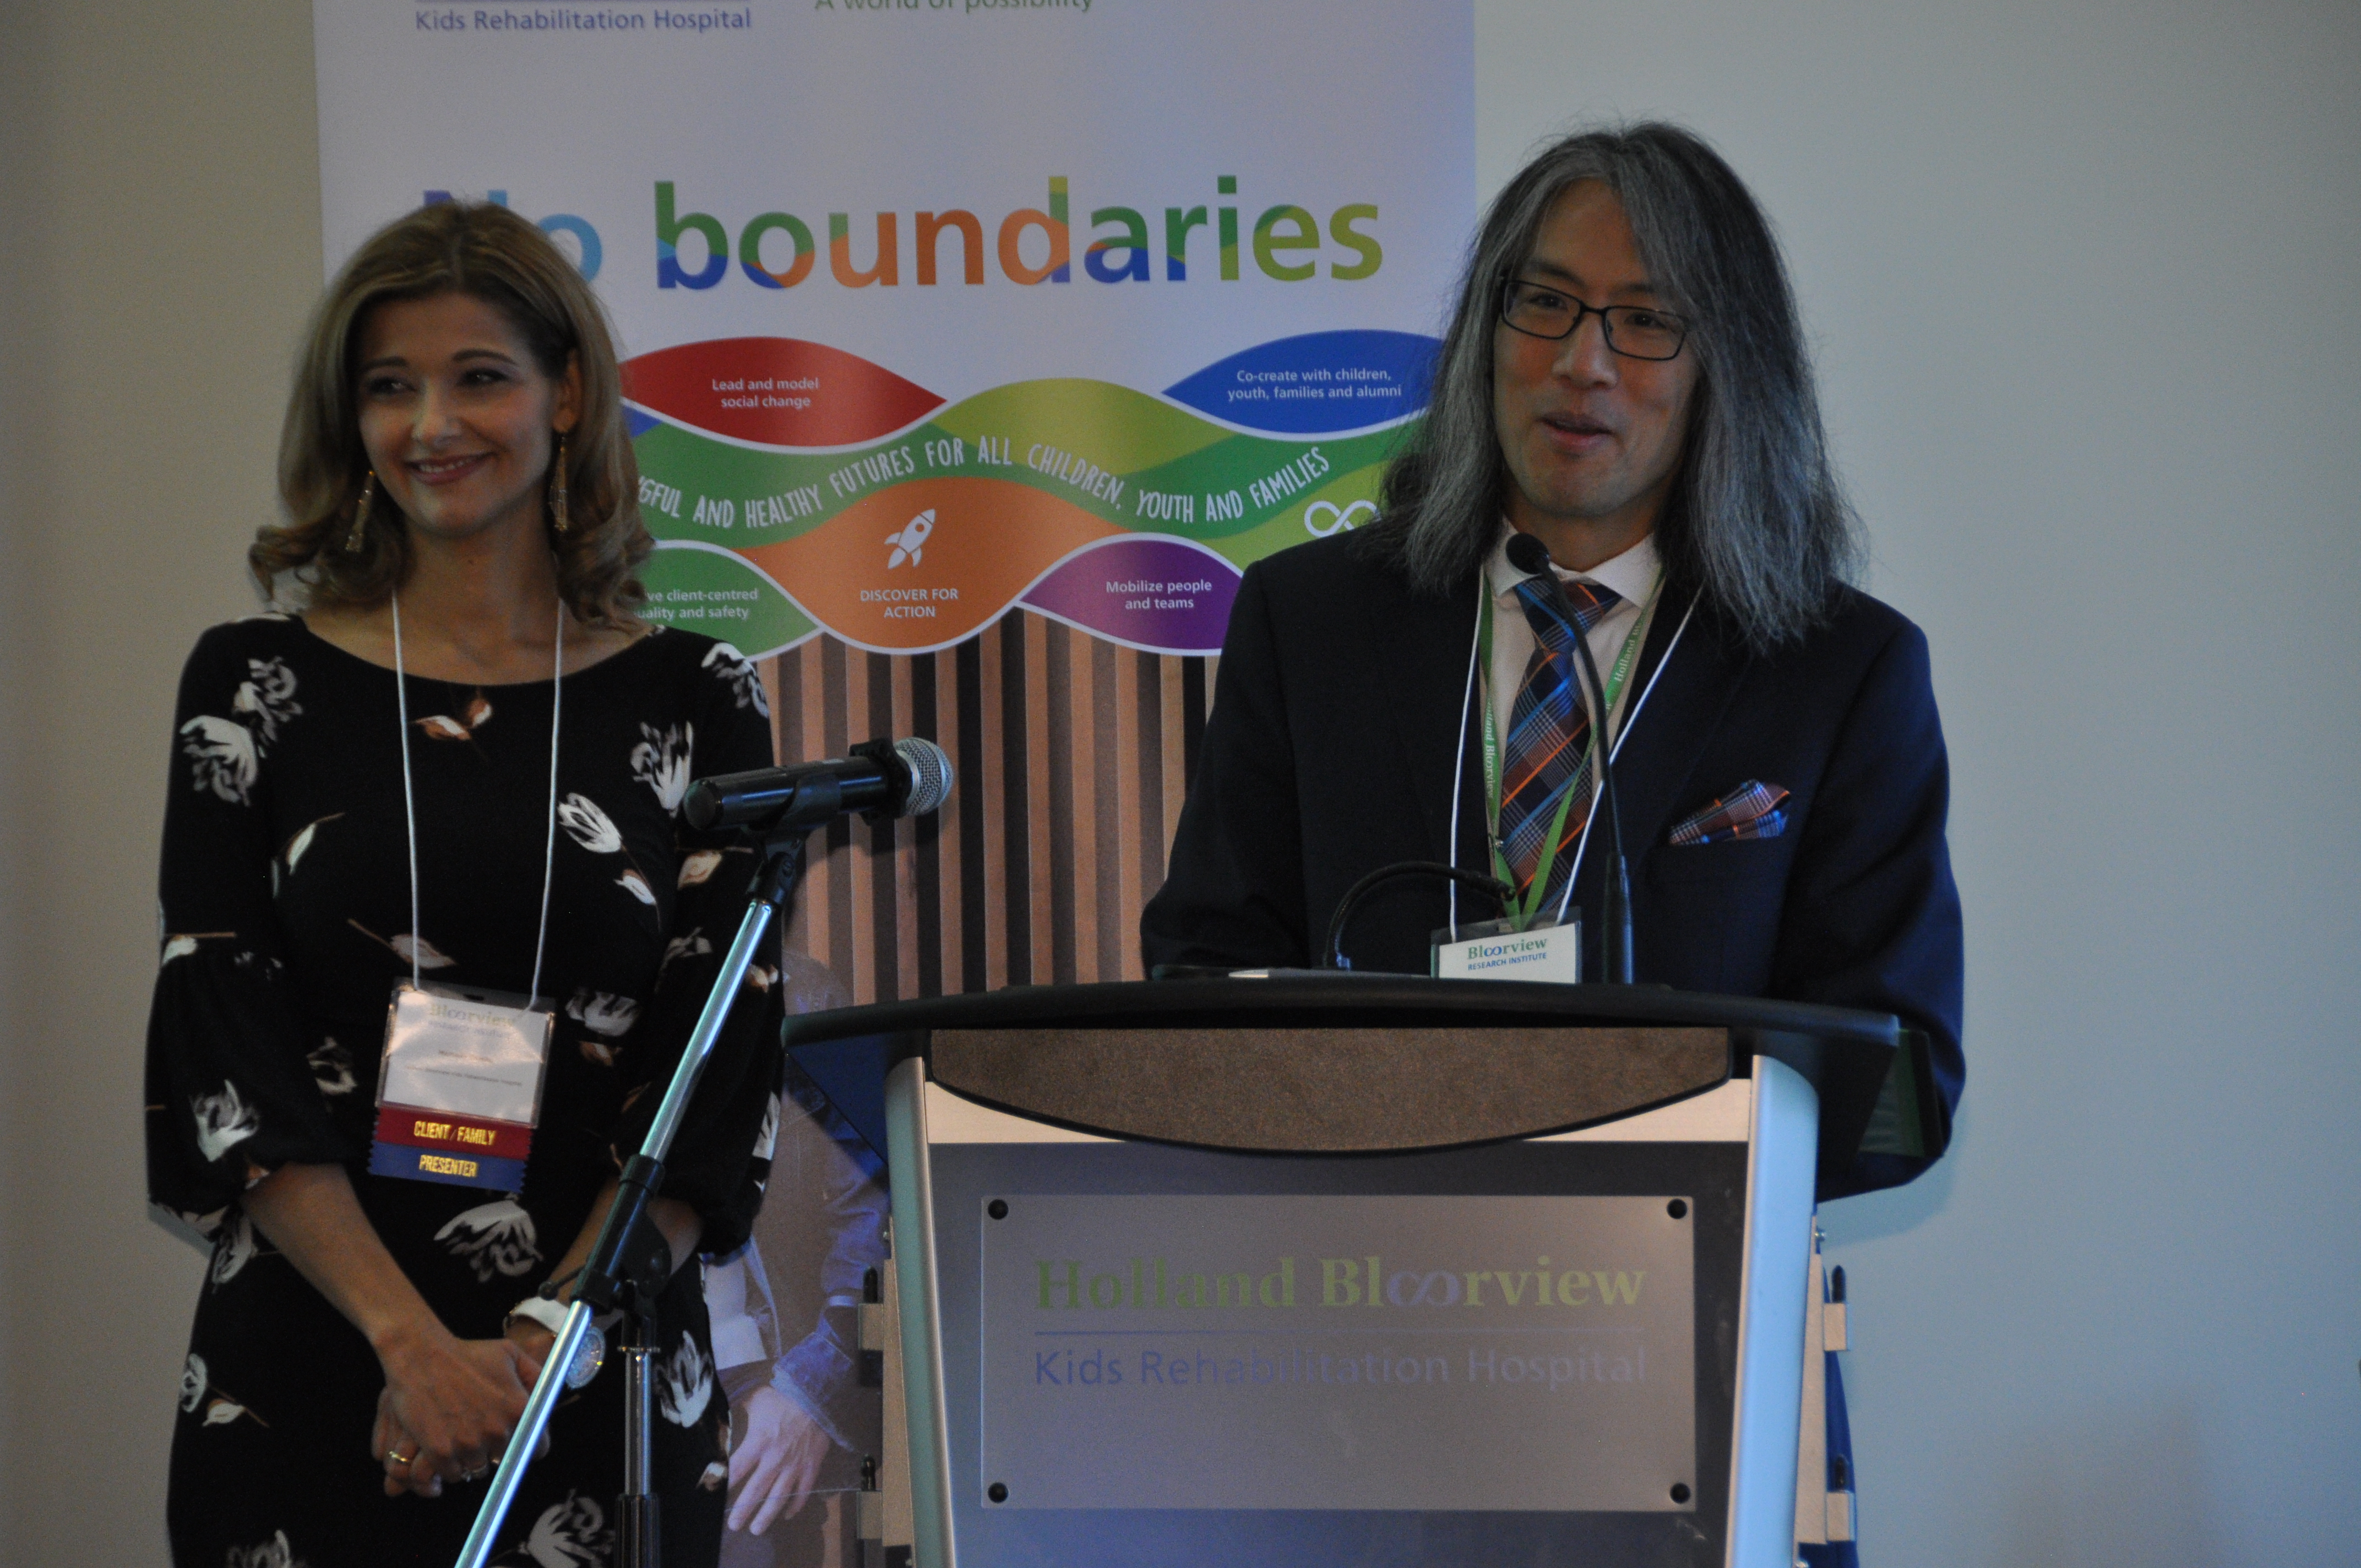 Manuela Comito, family leader, Holland Bloorview; and Tom Chau, vice-president of research at Holland Bloorview co-host the event